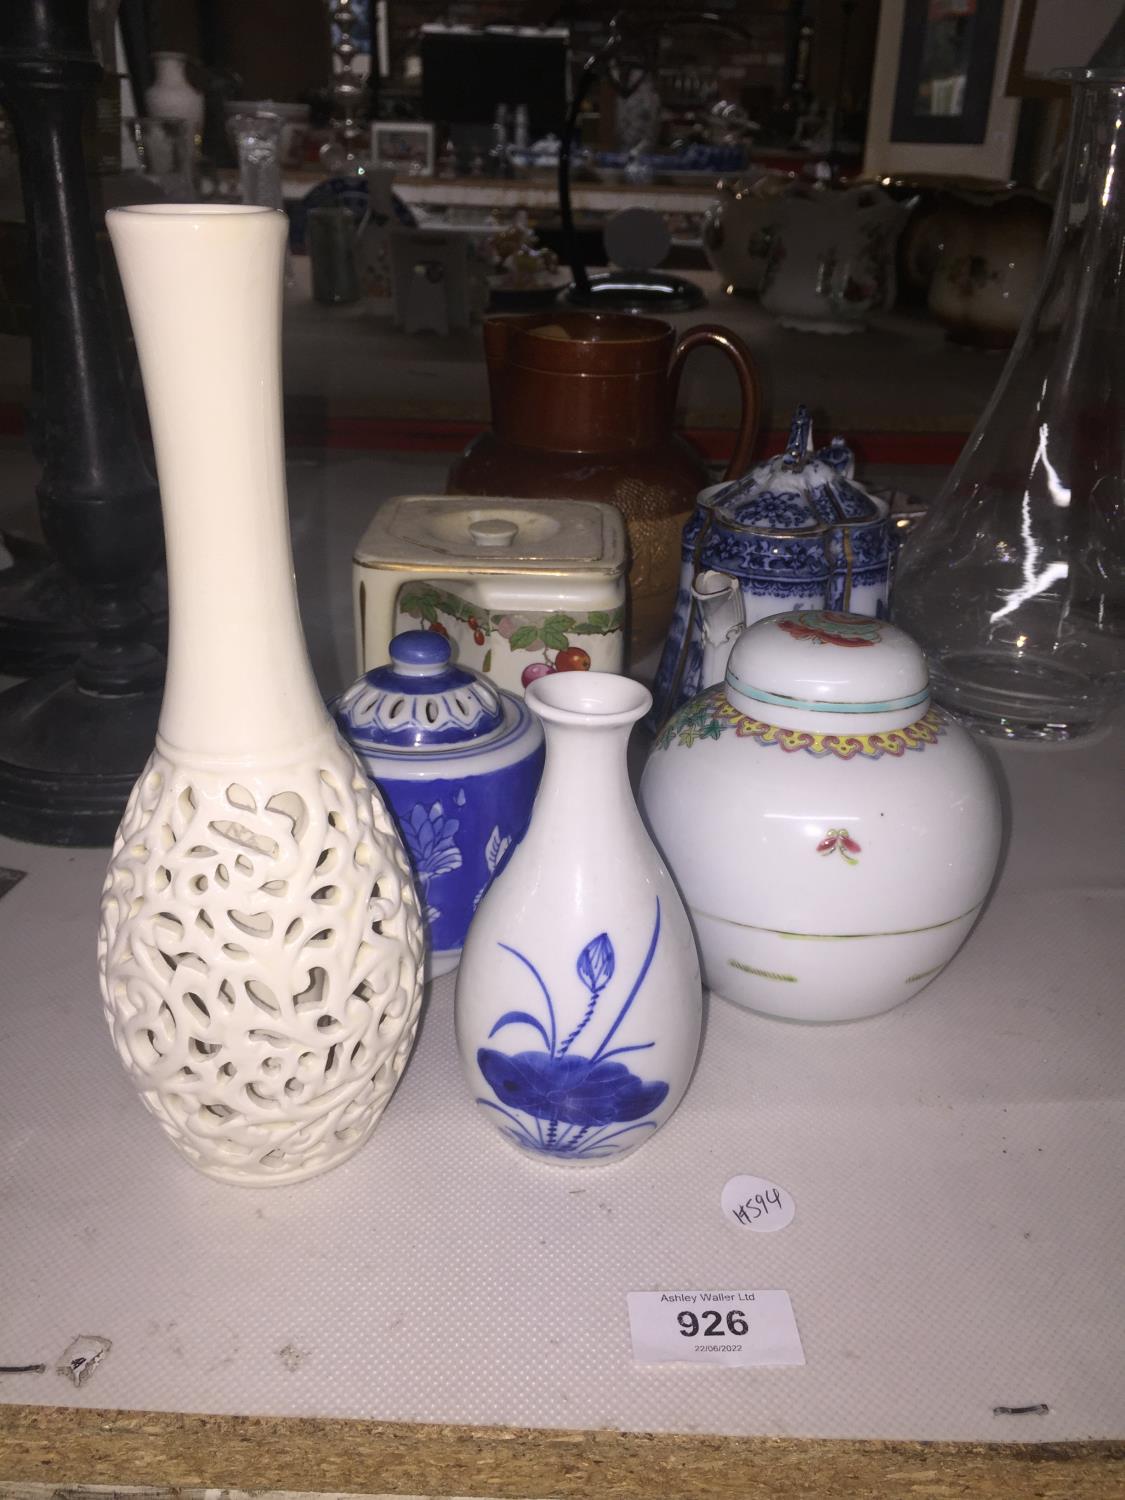 A QUANTITY OF CERAMIC ITEMS TO INCLUDE A ROYAL DOULTON JUG, A 'CUBE' TEAPOT, S. H. & SONS BLUE AND